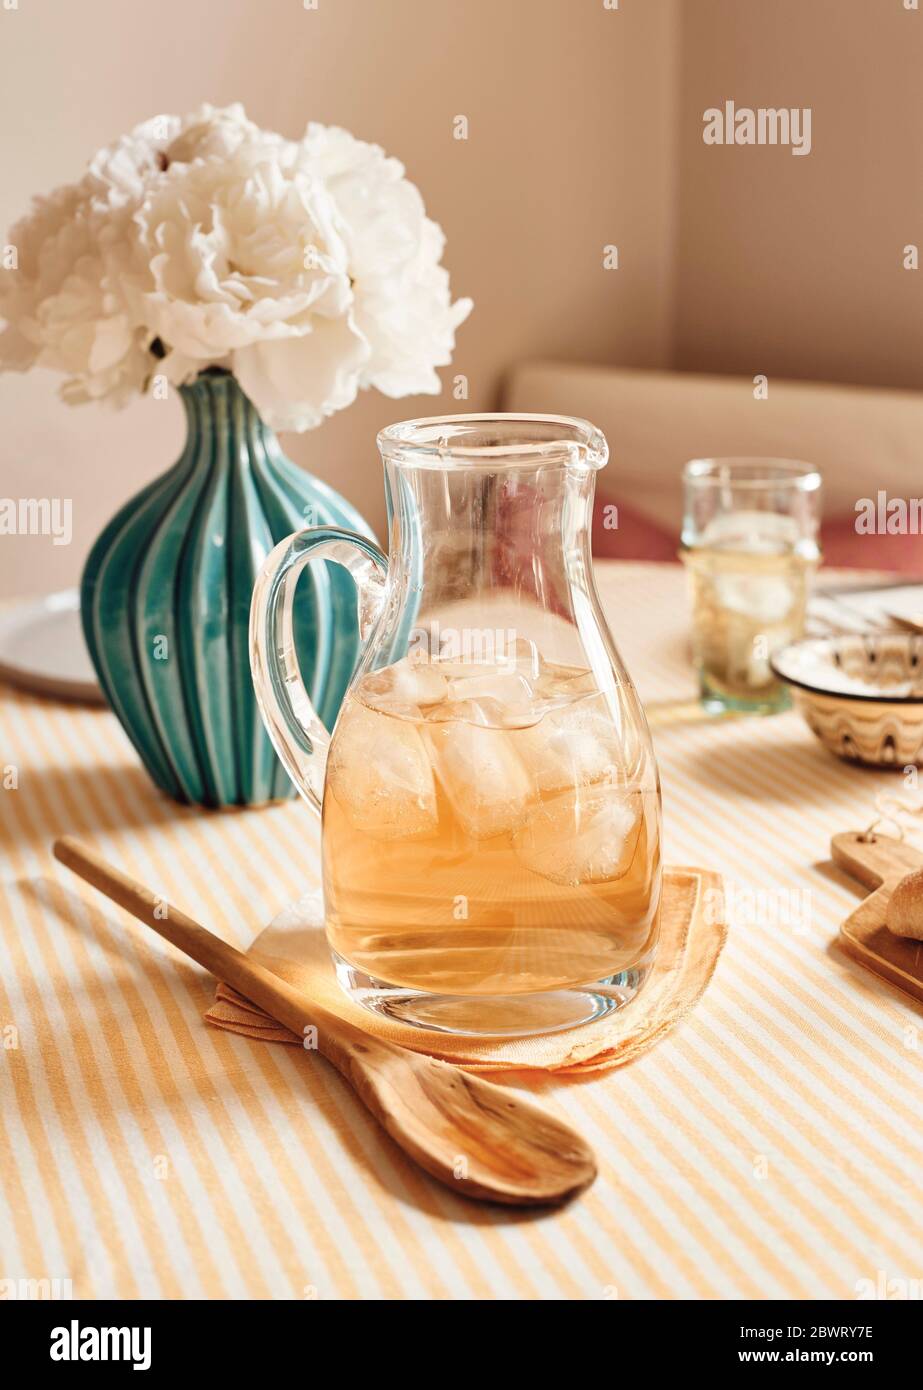 A pretty table setting in a kitchen, dressed up for brunch or a party, with a pitcher of iced tea. Stock Photo